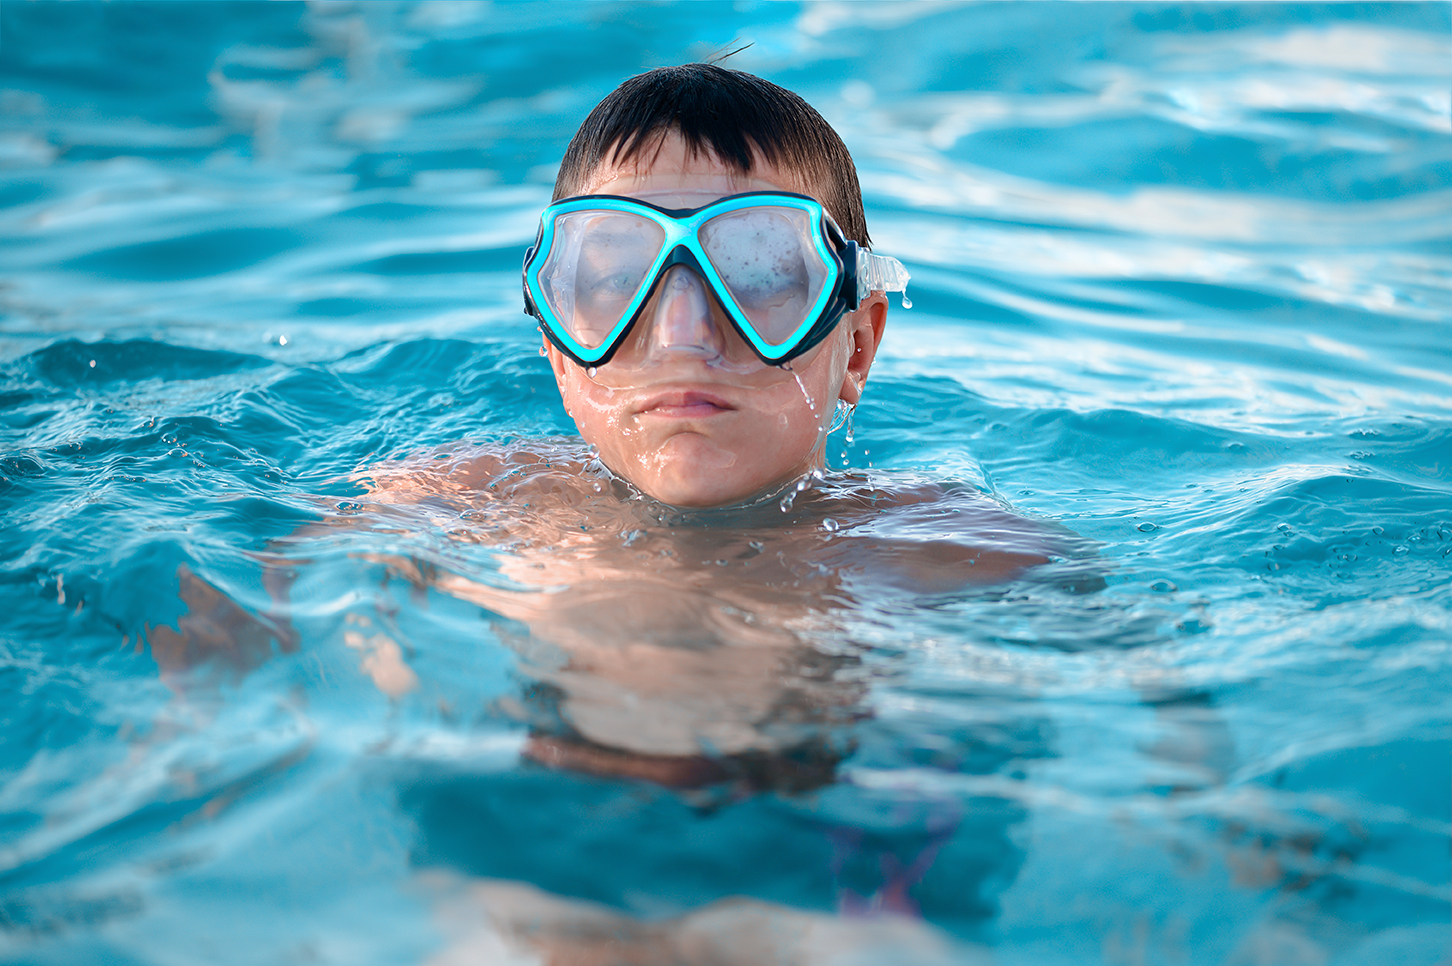 A child, a teenager in a swimming mask swims in clear blue water in a pool, pond or ocean, close-up.